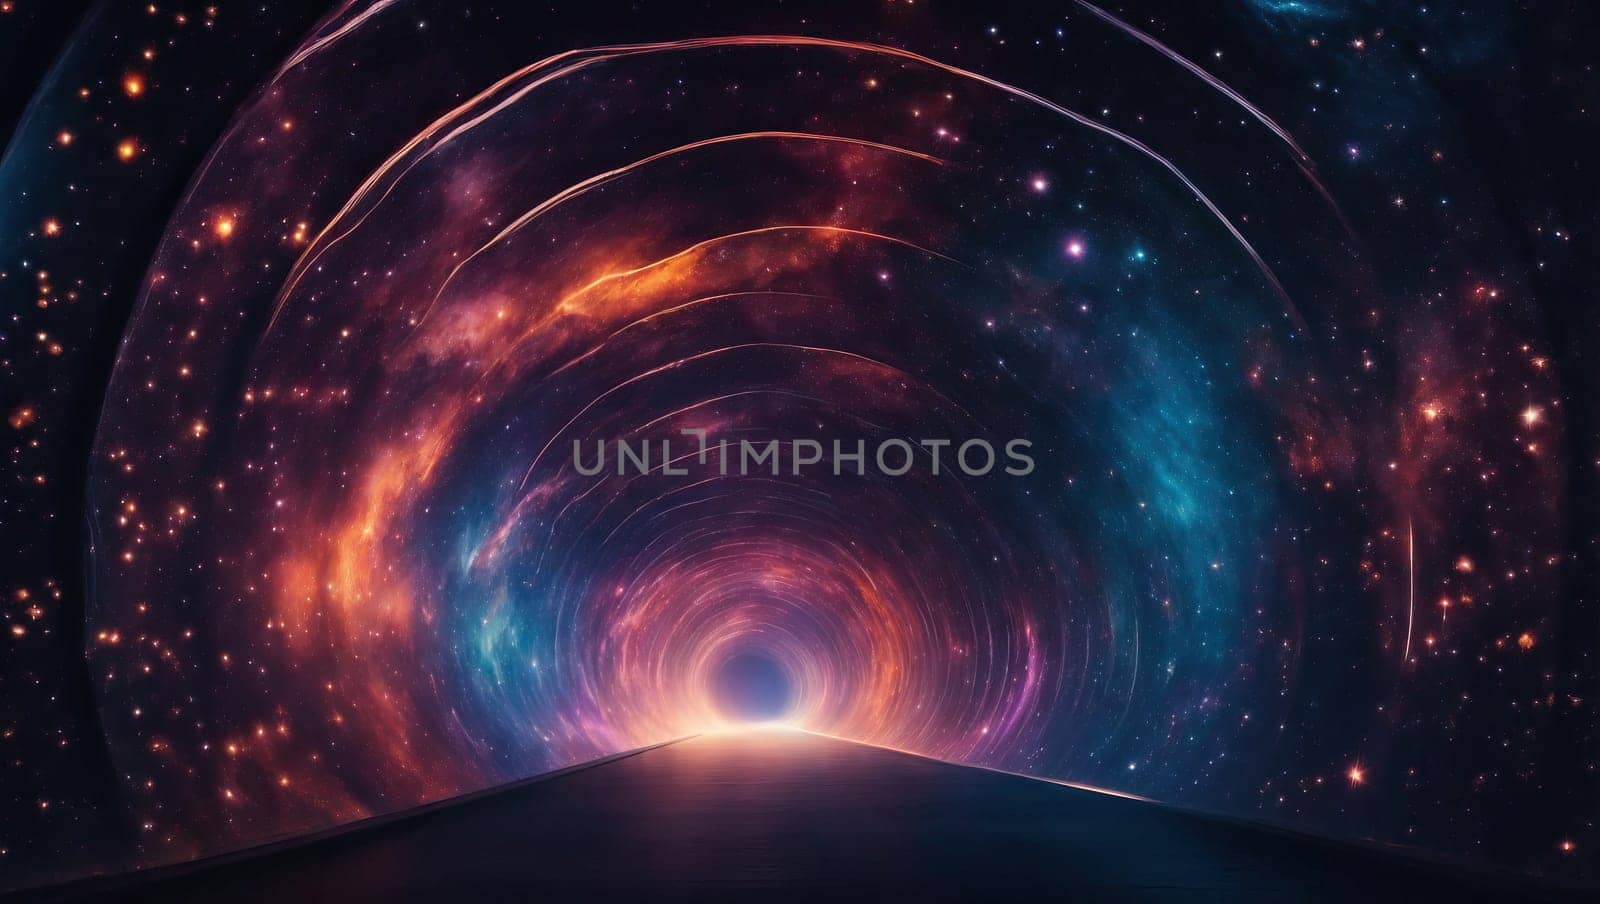 Inside a tunnel made of nebula stars by applesstock